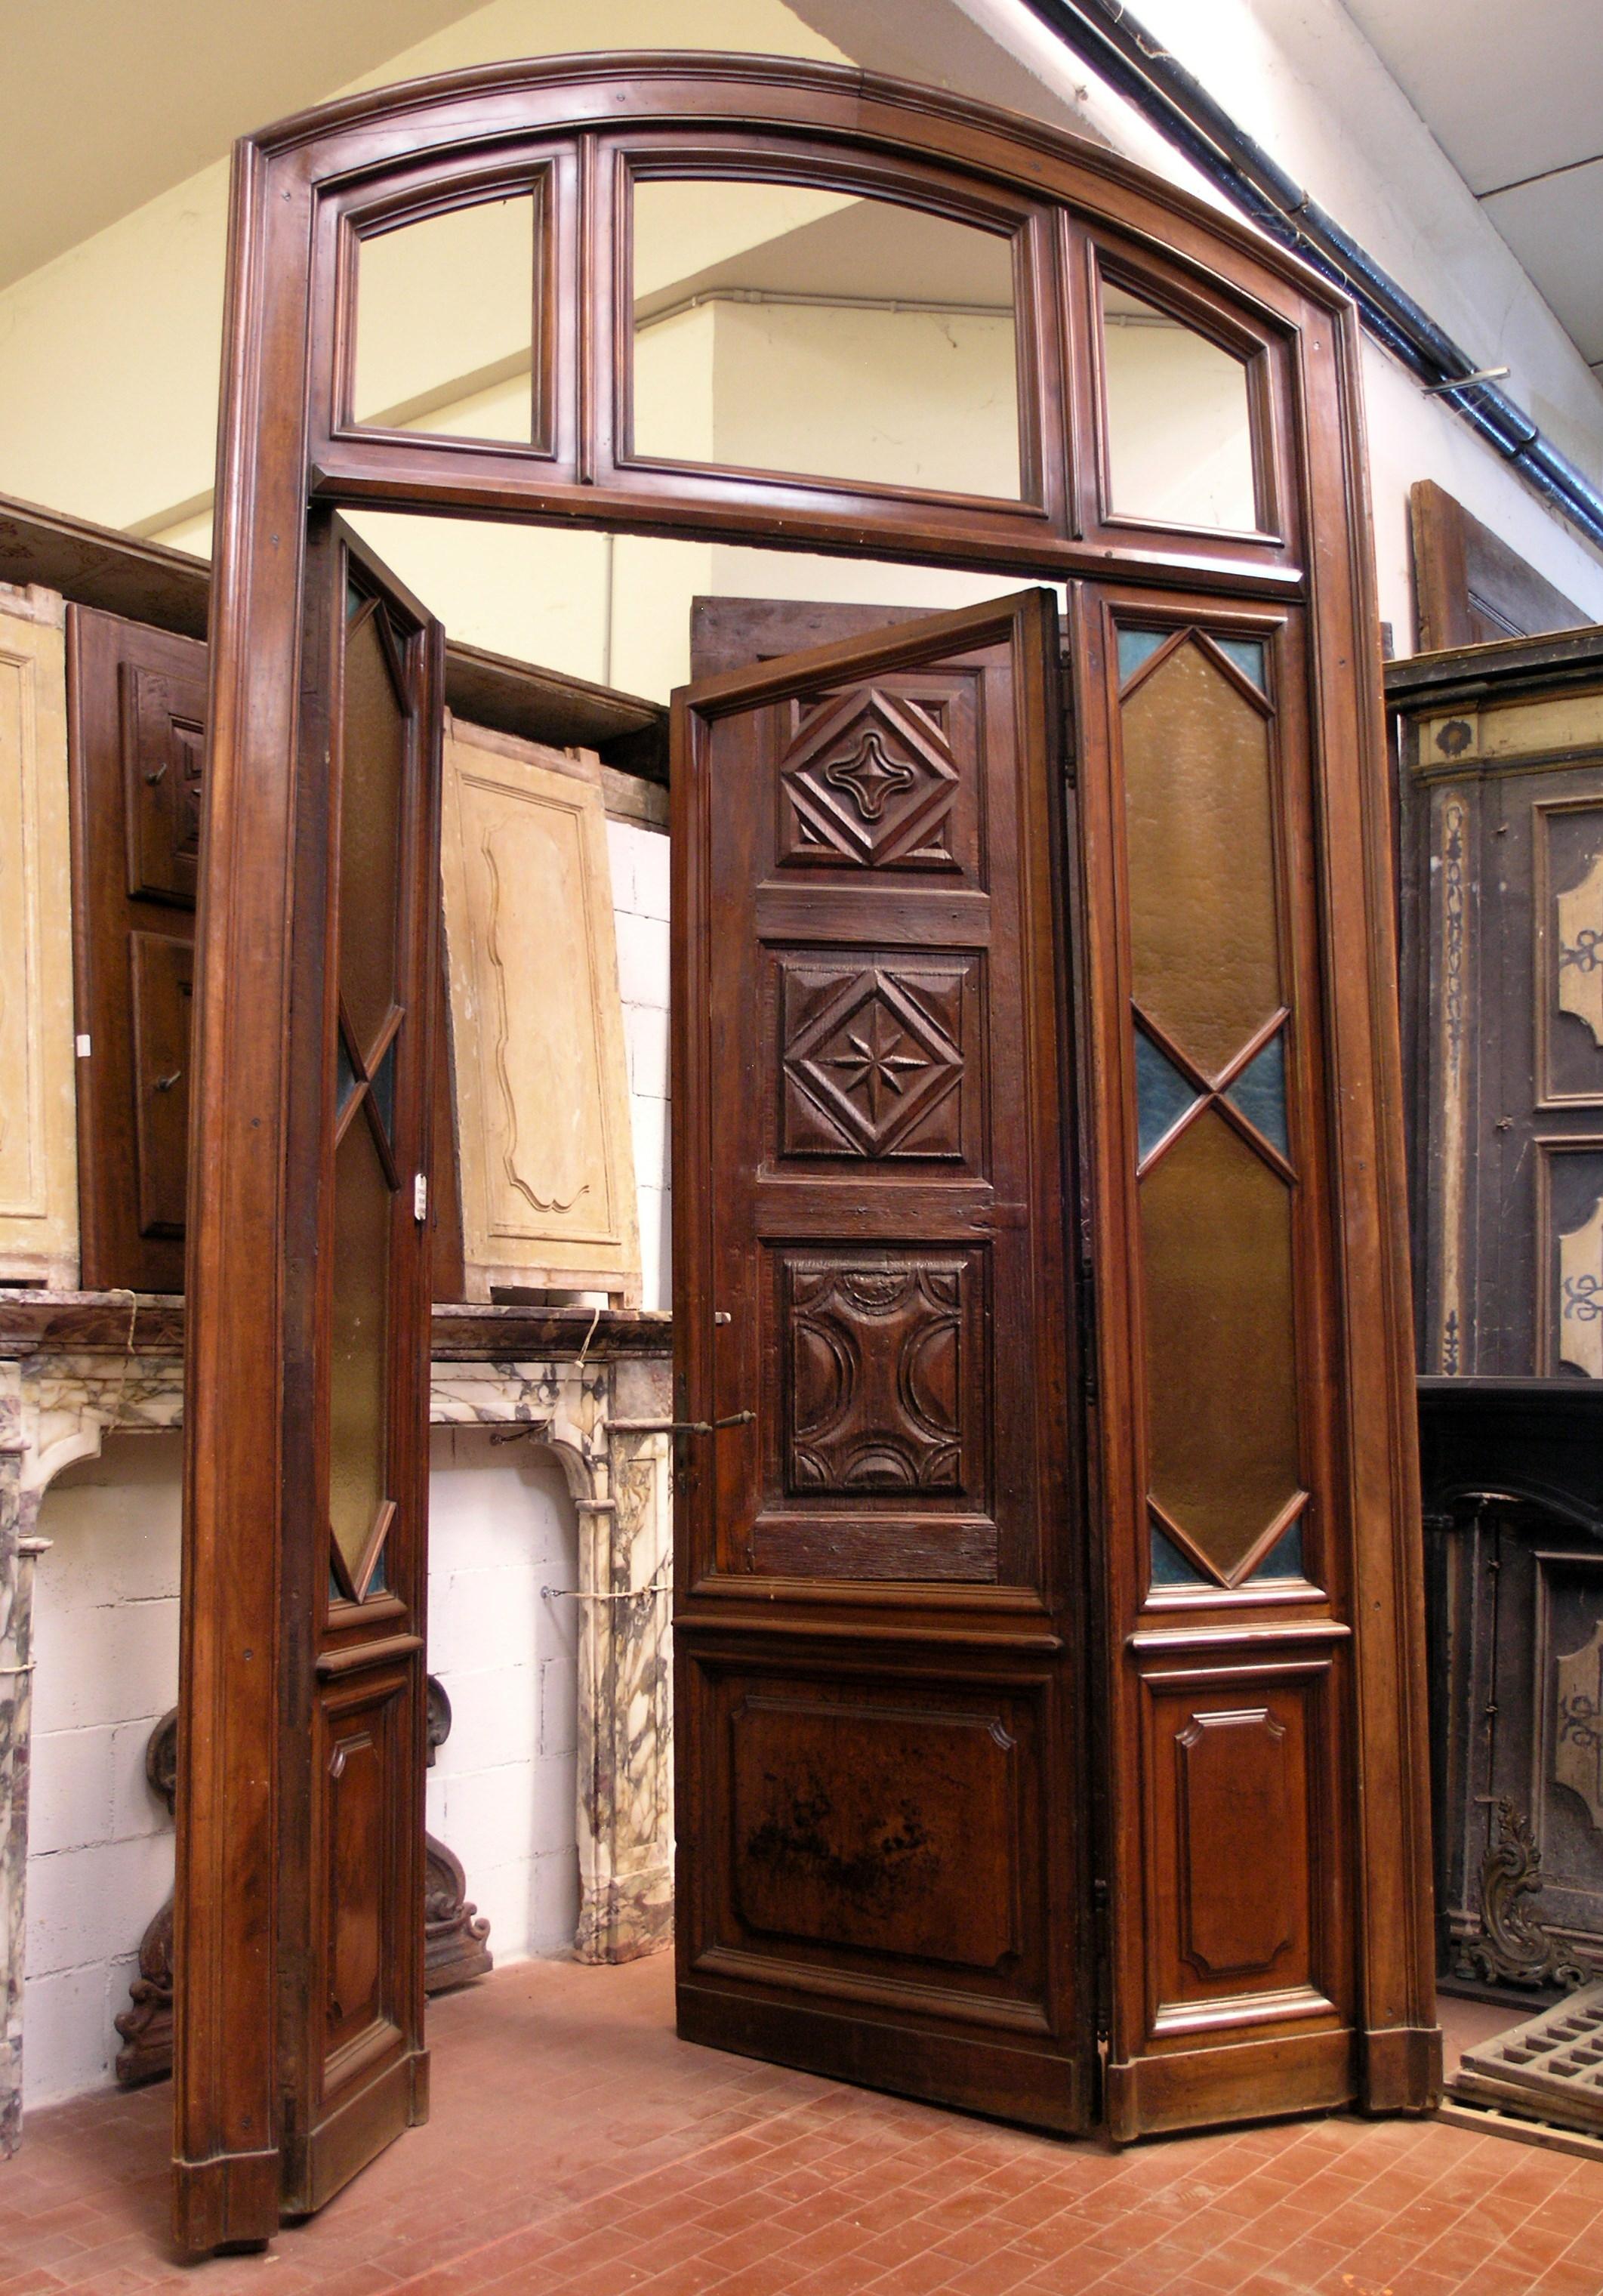 Antique portal with original glass window
made of Walnut.
Comes from Lombardia, north Italy.